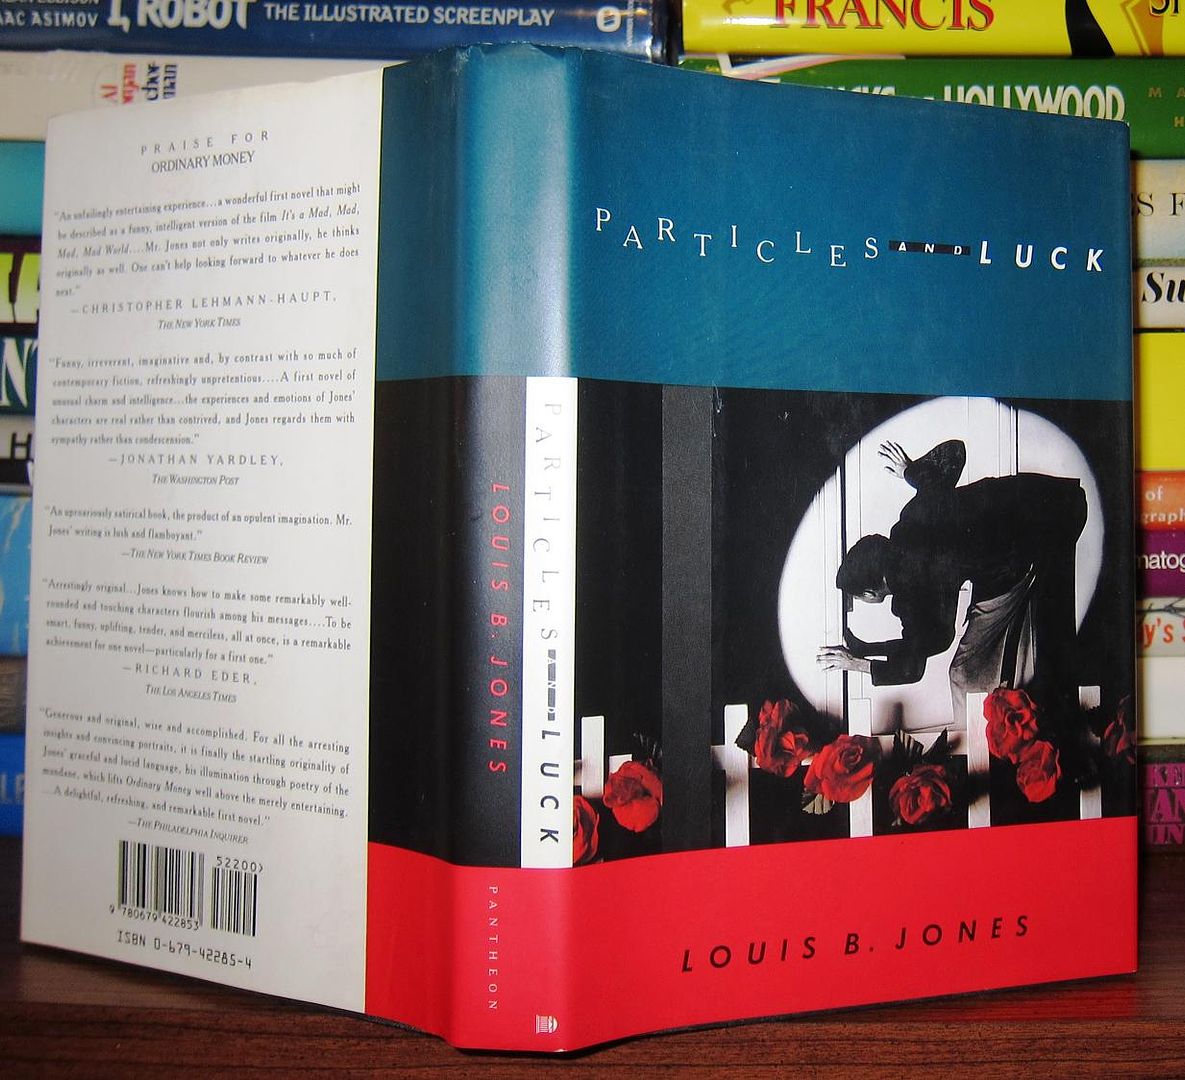 JONES, LOUIS B. - Particles and Luck